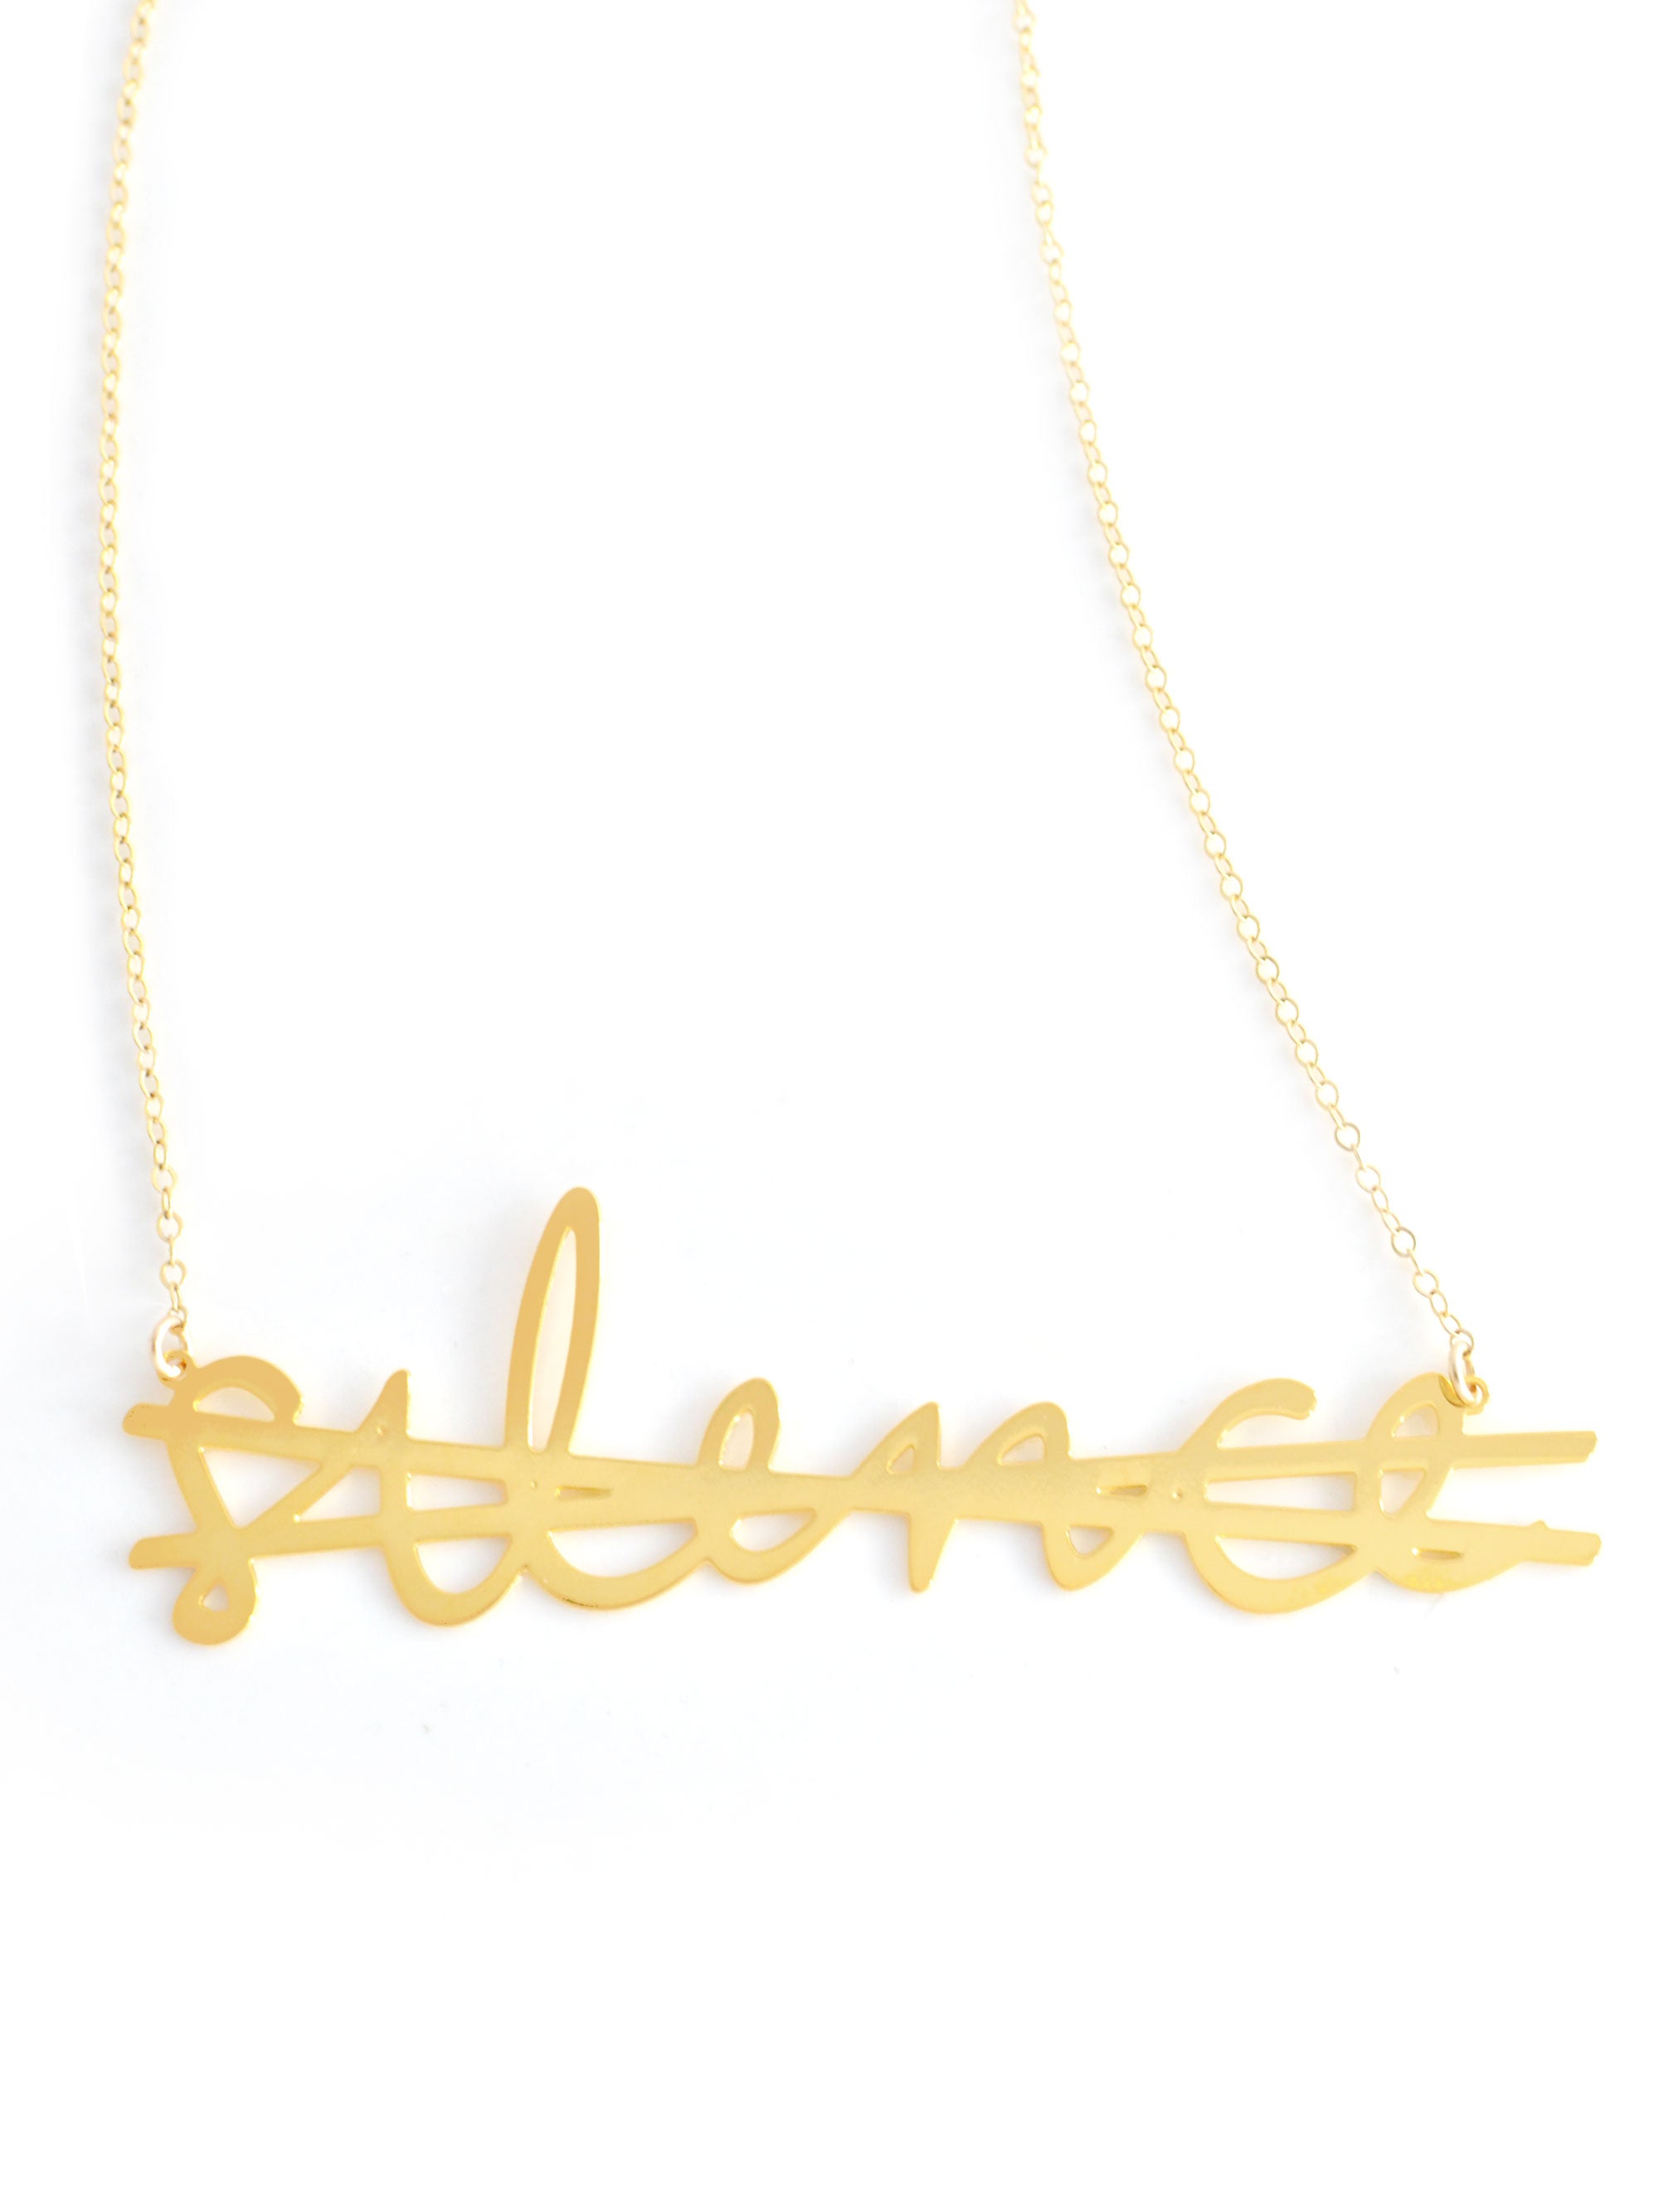 No More Silence Necklace - High Quality, Affordable, Hand Written, Empowering, Self Love, Mantra Word Necklace - Available in Gold and Silver - Small and Large Sizes - Made in USA - Brevity Jewelry